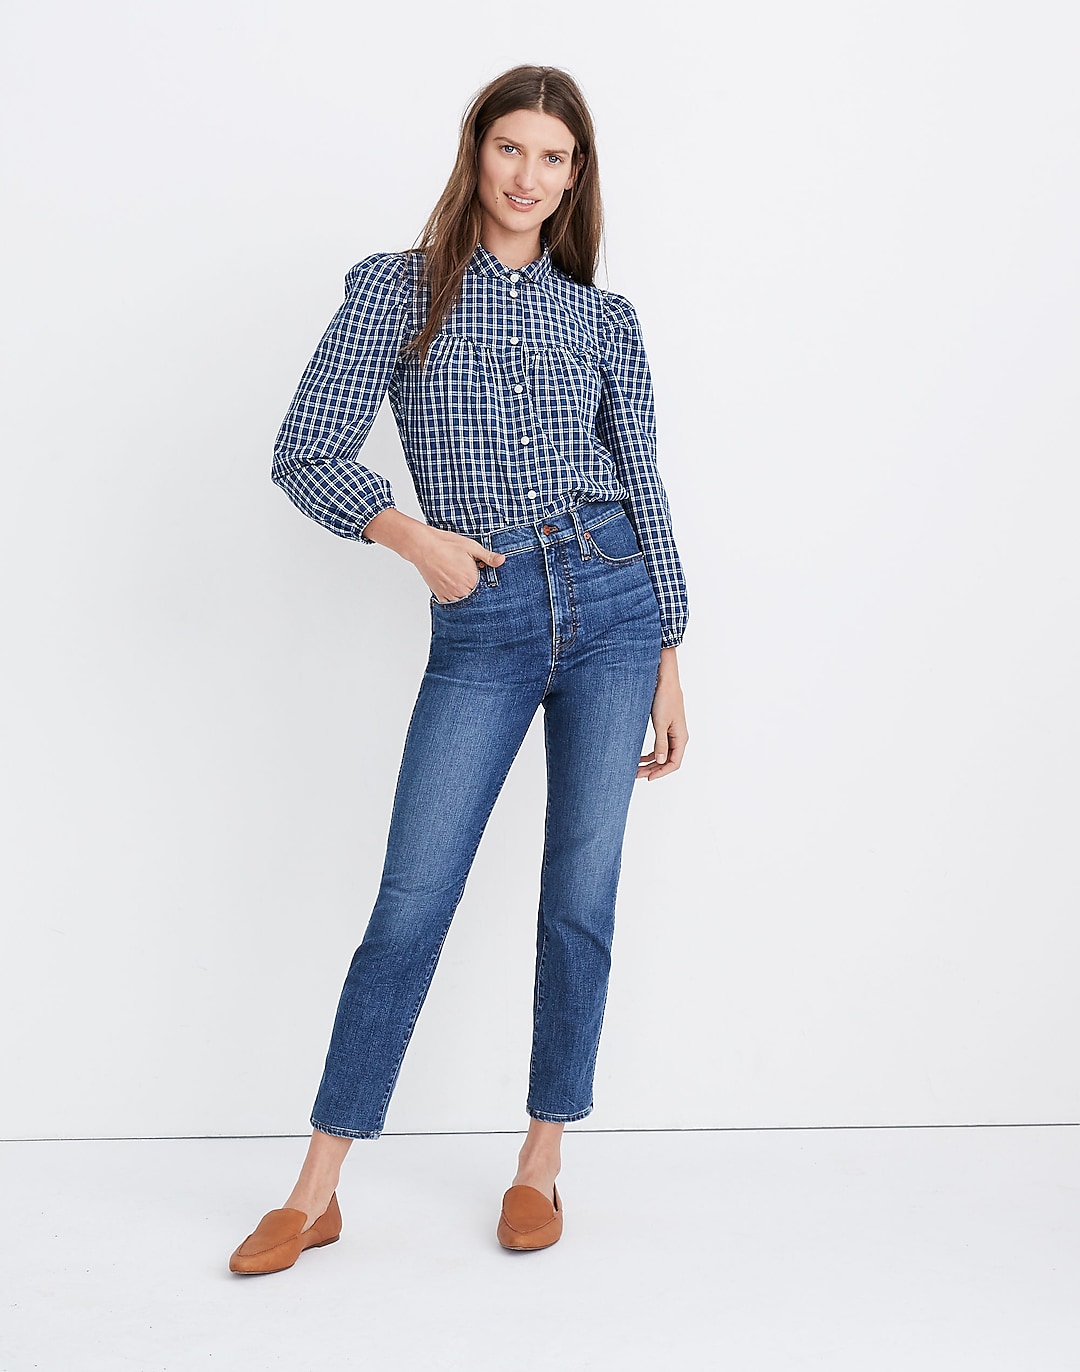 Stovepipe Jeans in Antoine Wash | Madewell